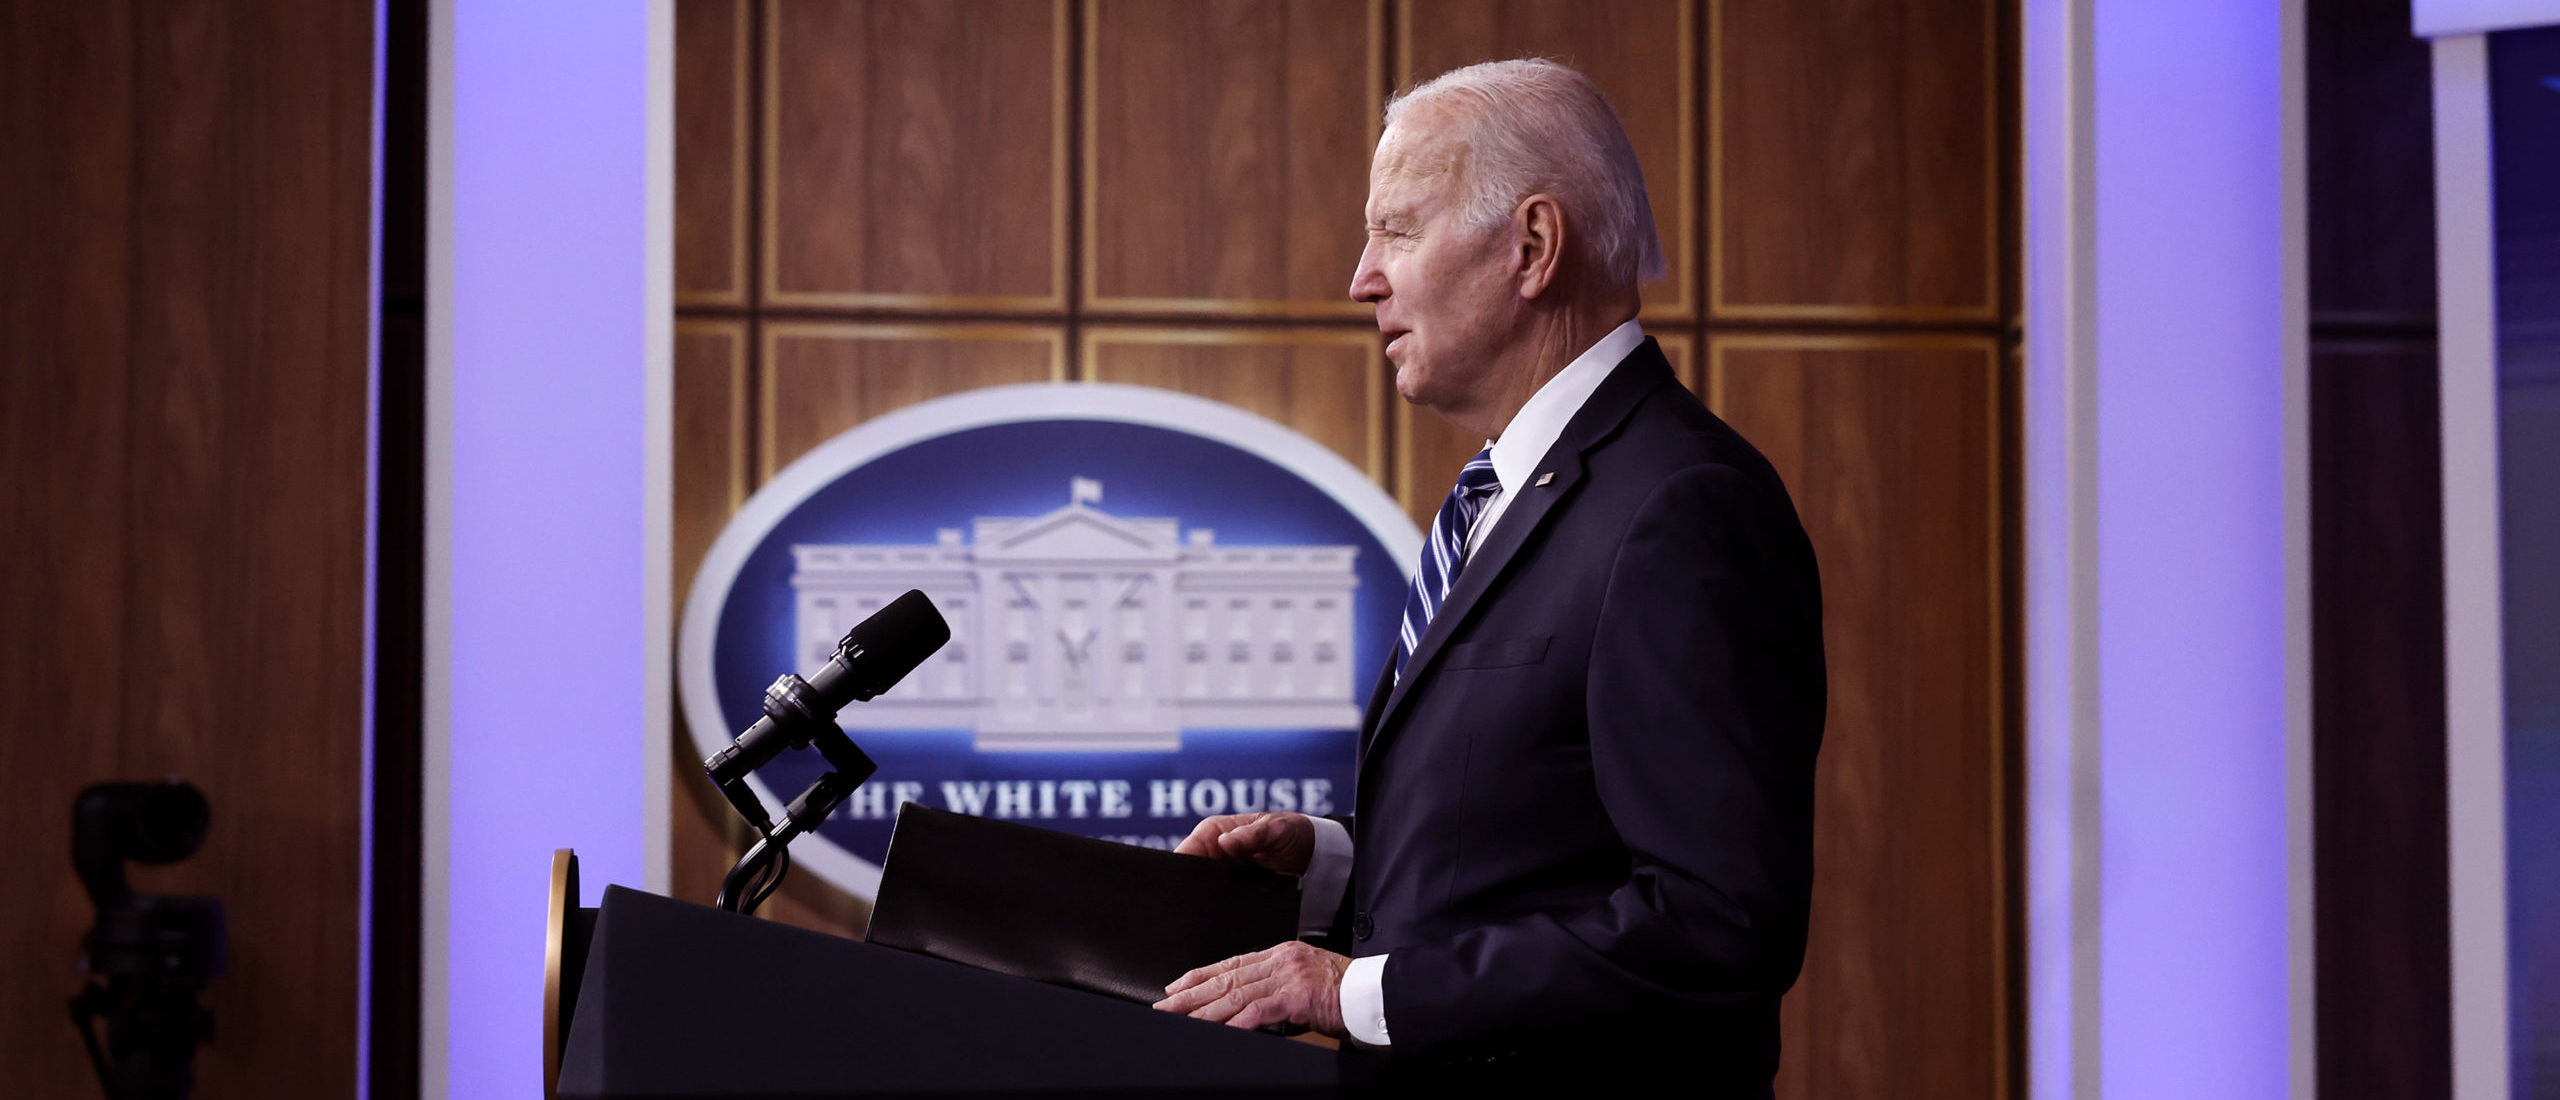 WASHINGTON, DC - FEBRUARY 03: US President Joe Biden delivers remarks about the latest jobs report in the South Court Auditorium in the Eisenhower Executive Office Building on February 03, 2023 in Washington, DC. According to the Labor Department, employers added 517,000 jobs in January, more than economists anticipated and sending the unemployment rate to its lowest level since 1969. (Photo by Chip Somodevilla/Getty Images)